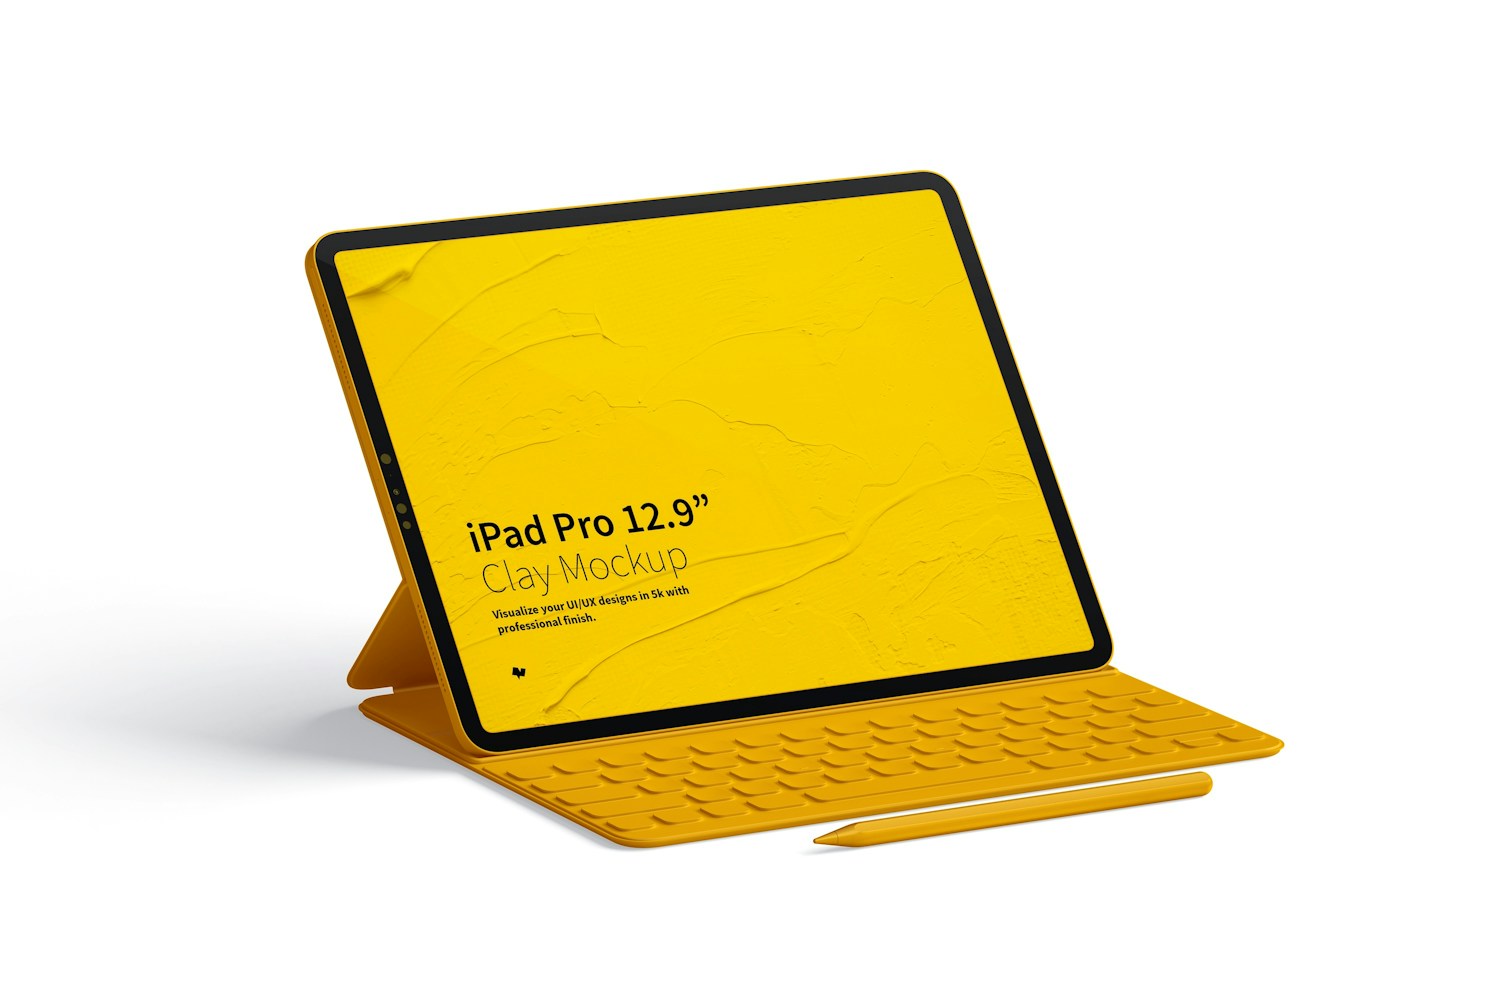 Change and customize the iPad Pro according to your liking.